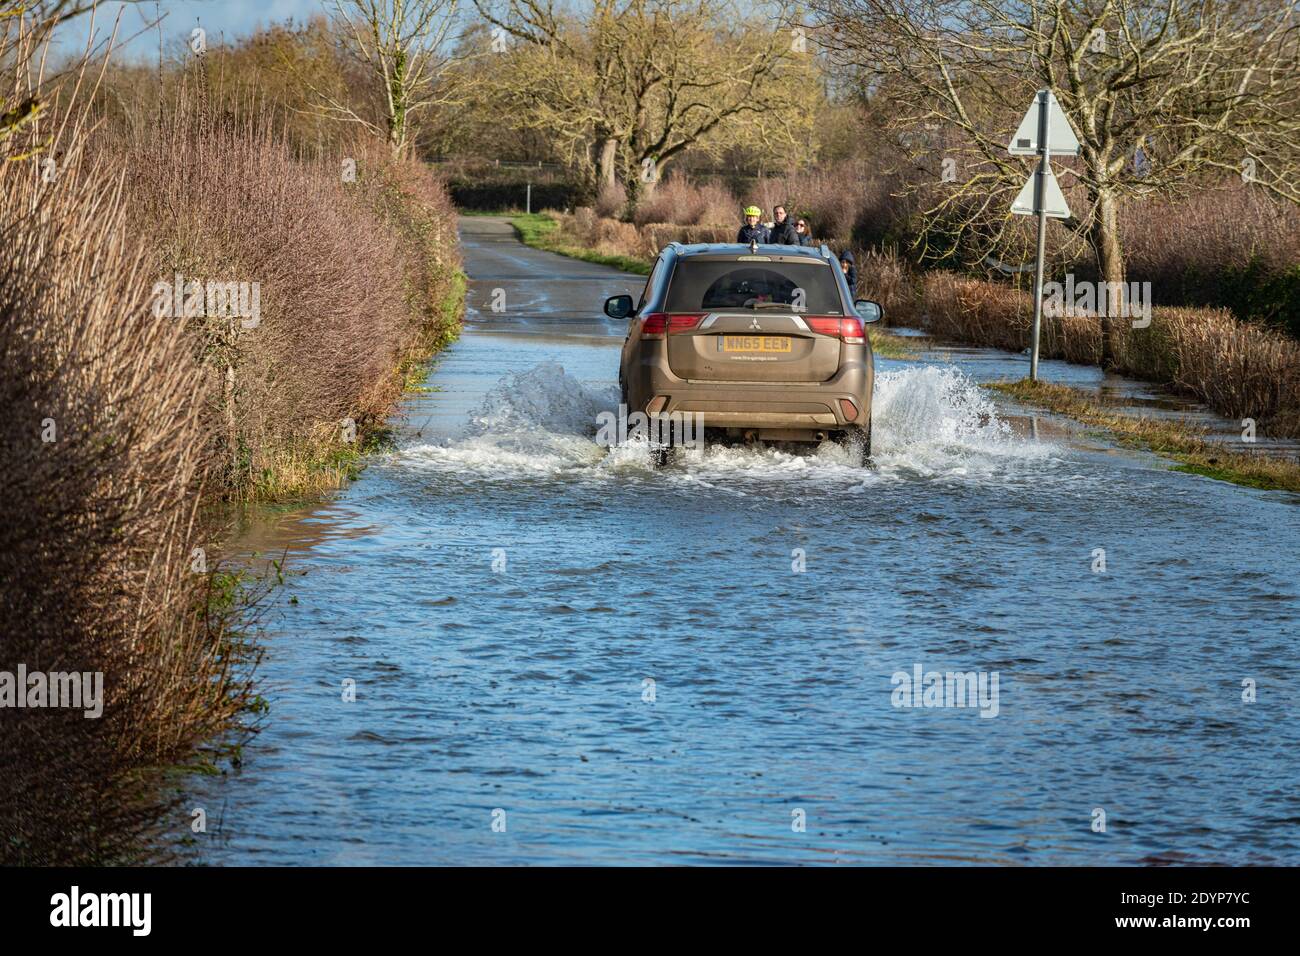 Wytham, Oxfordshire, UK. 27 December, 2020. Cars drive through the flooded road from Wytham to Wolvercote. Flooding in Oxfordshire. Storm Bella brought even more rain to Oxfordshire causing flooding in low lying areas. Plenty of people are out exercising in the sunshine. Credit: Sidney Bruere/Alamy Live News Stock Photo